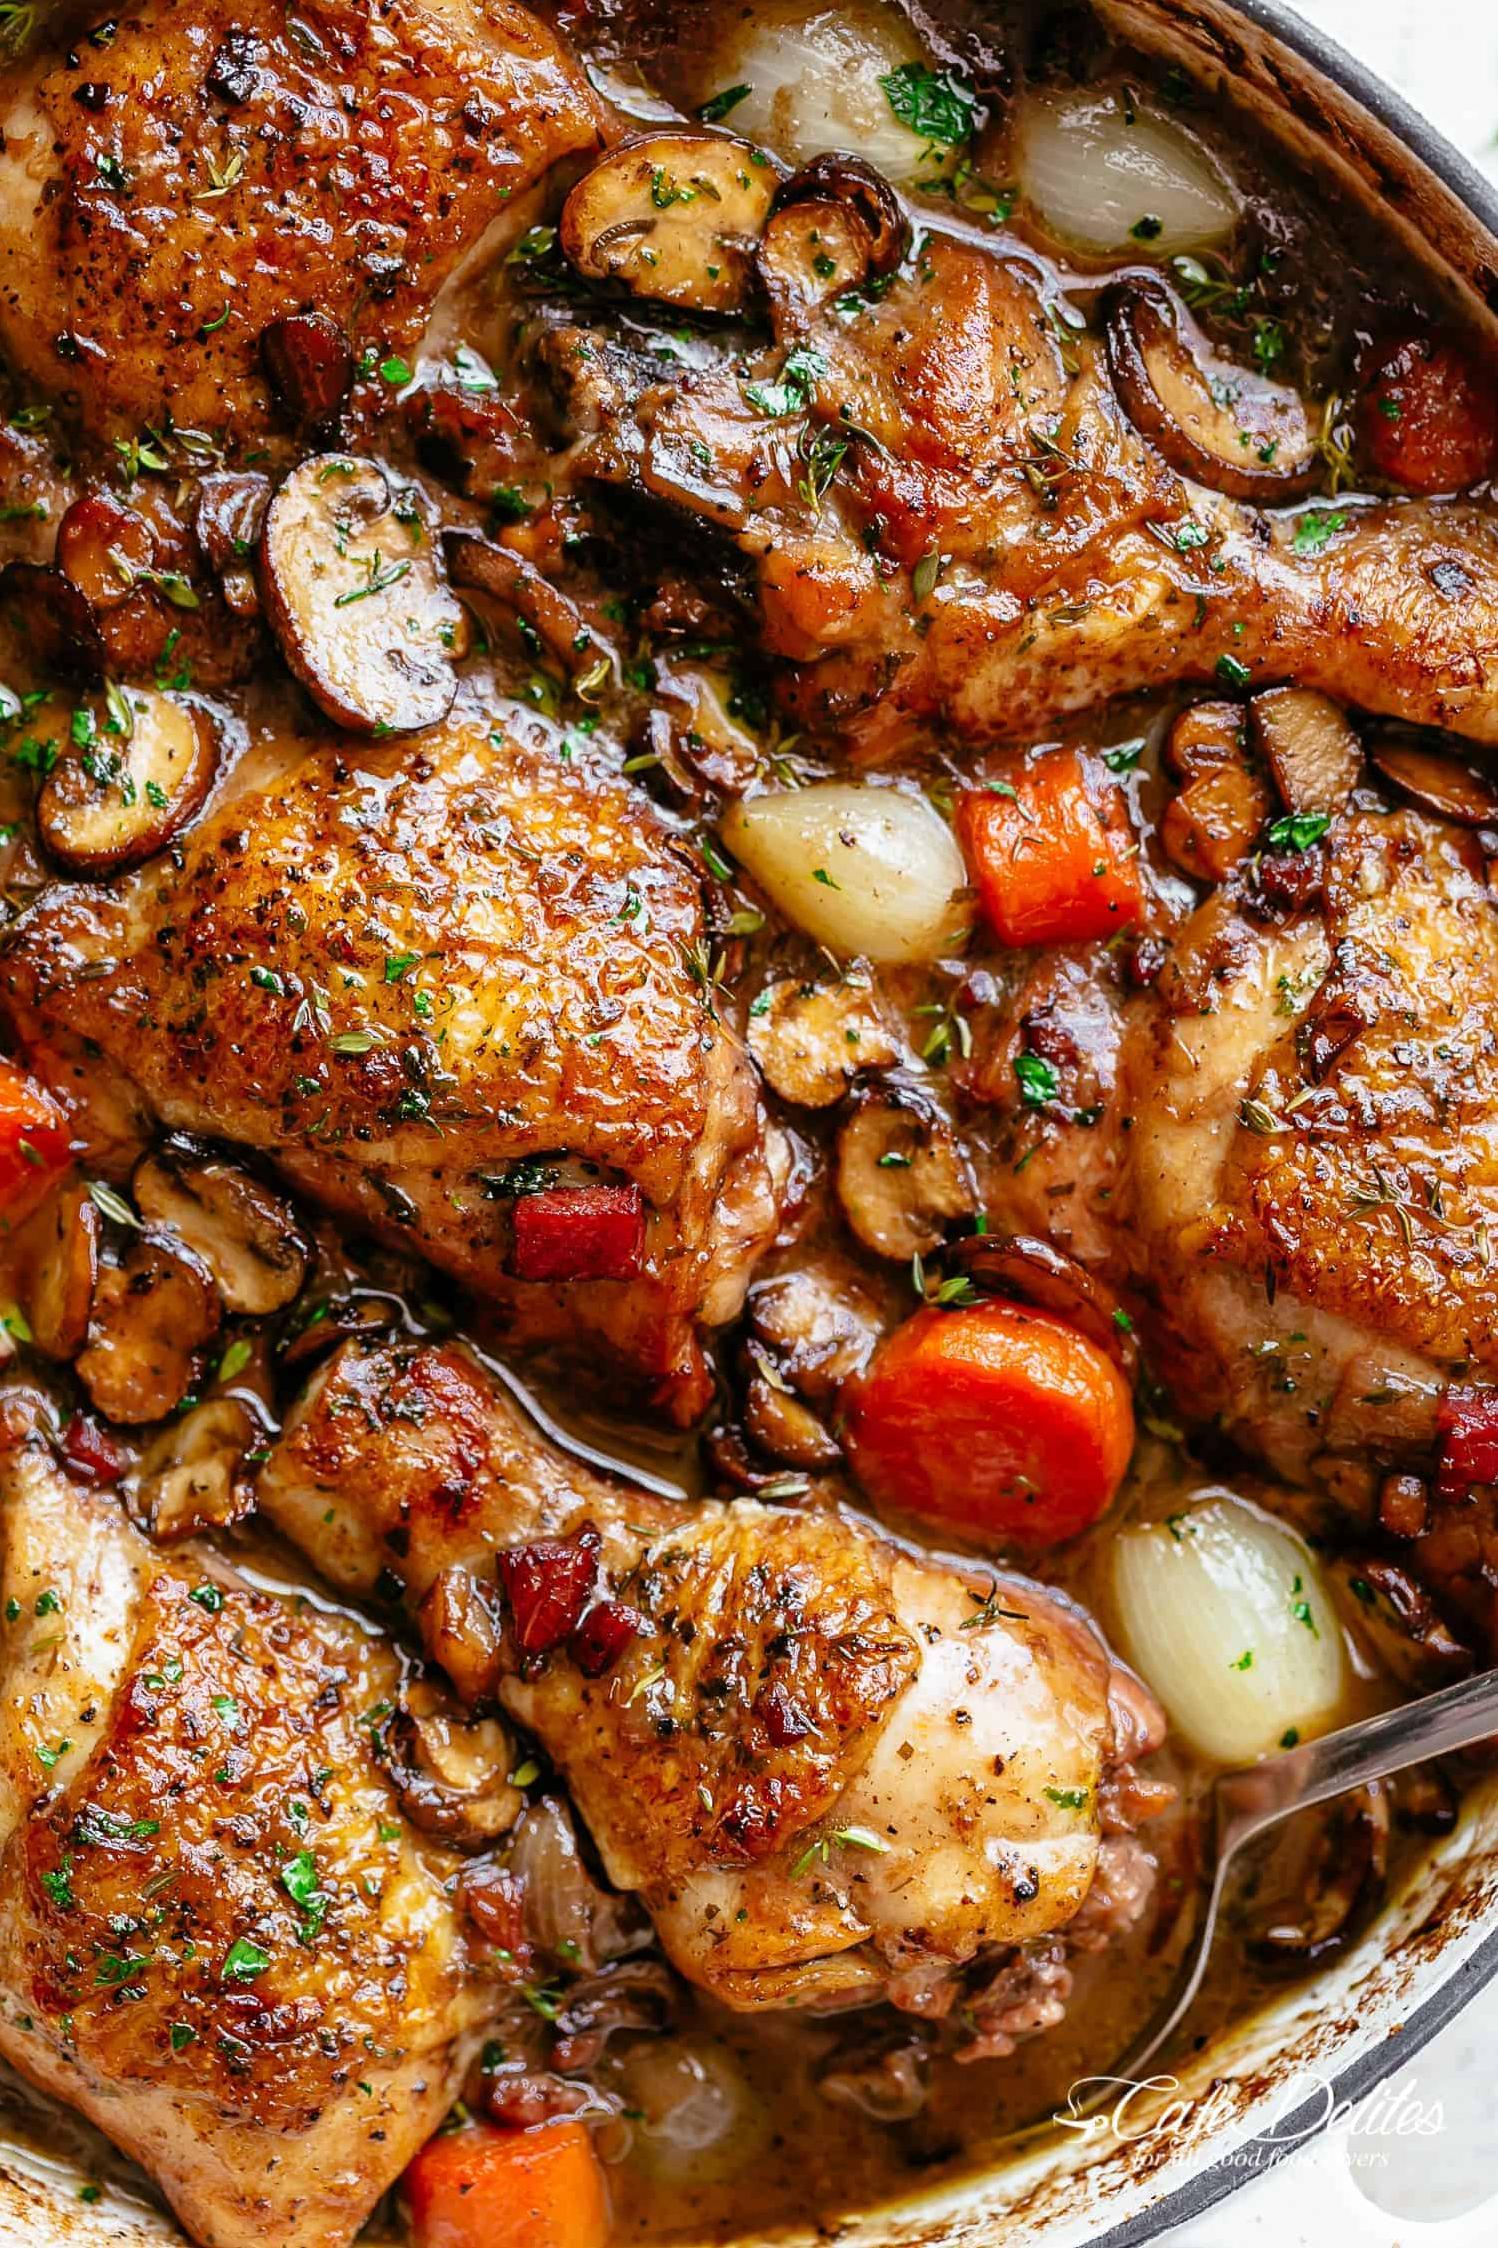  Rich and hearty chicken casserole with a red wine base